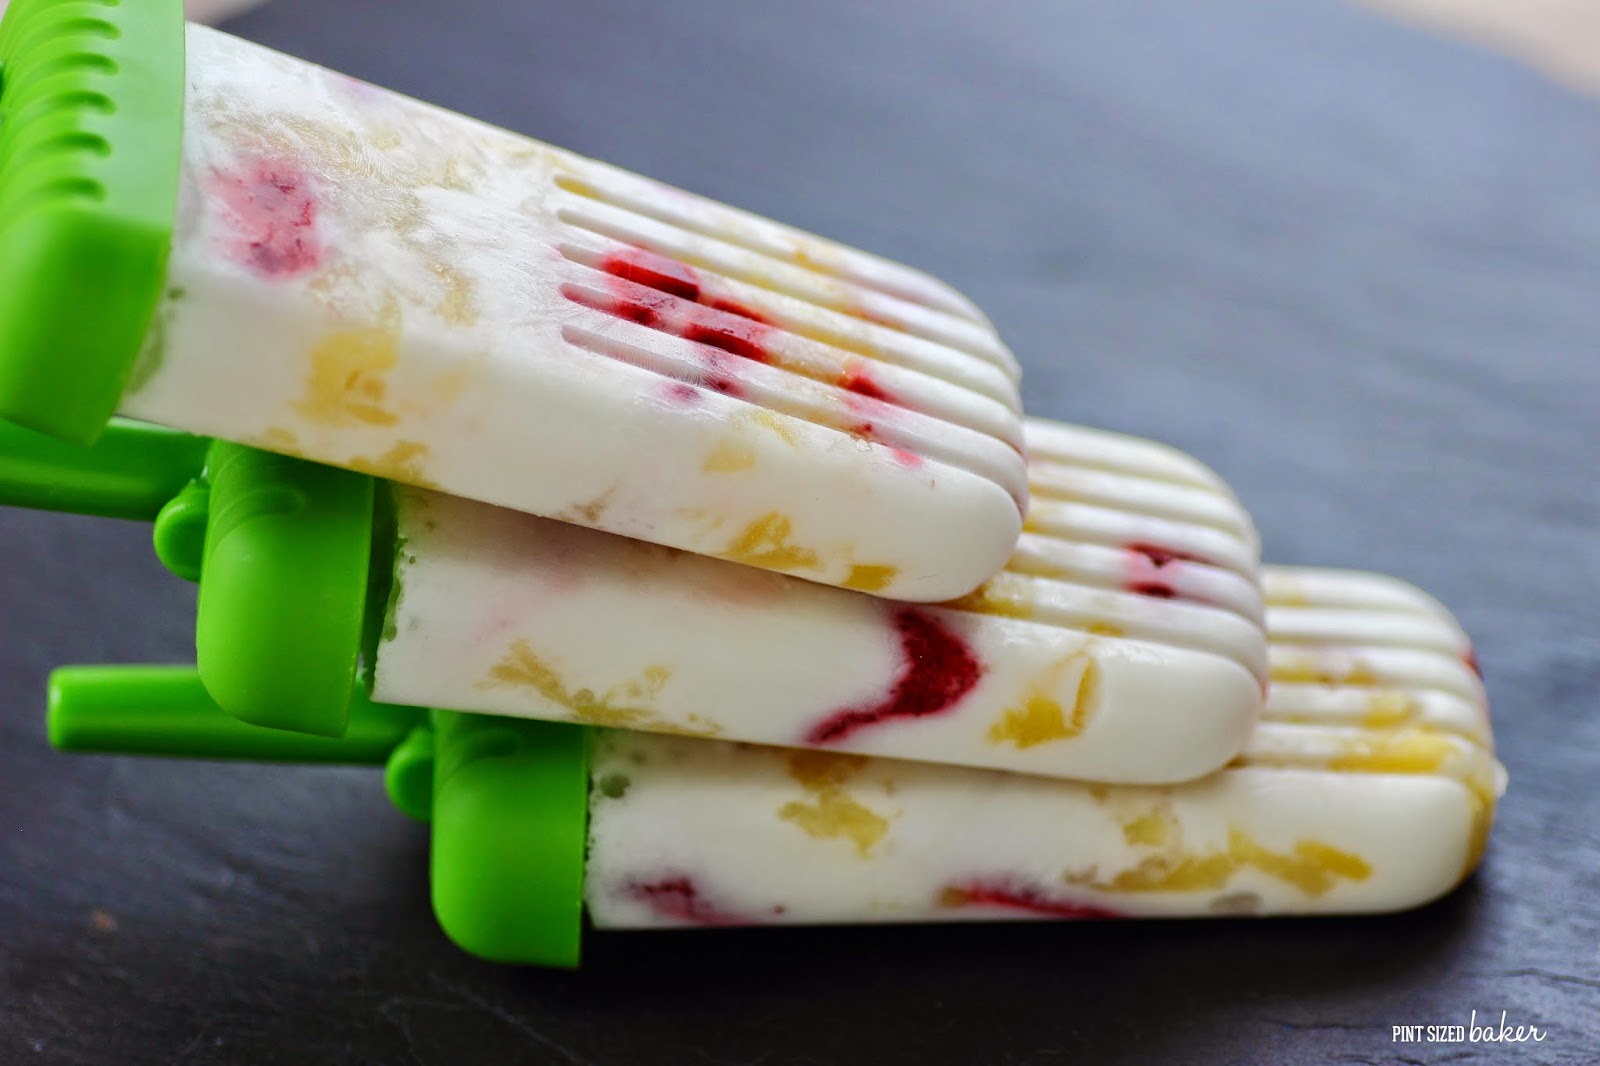 Kids young and old can make and enjoy these Pineapple Strawberry Coconut Popsicles Real, simple ingredients that are dairy free and naturally gluten free.